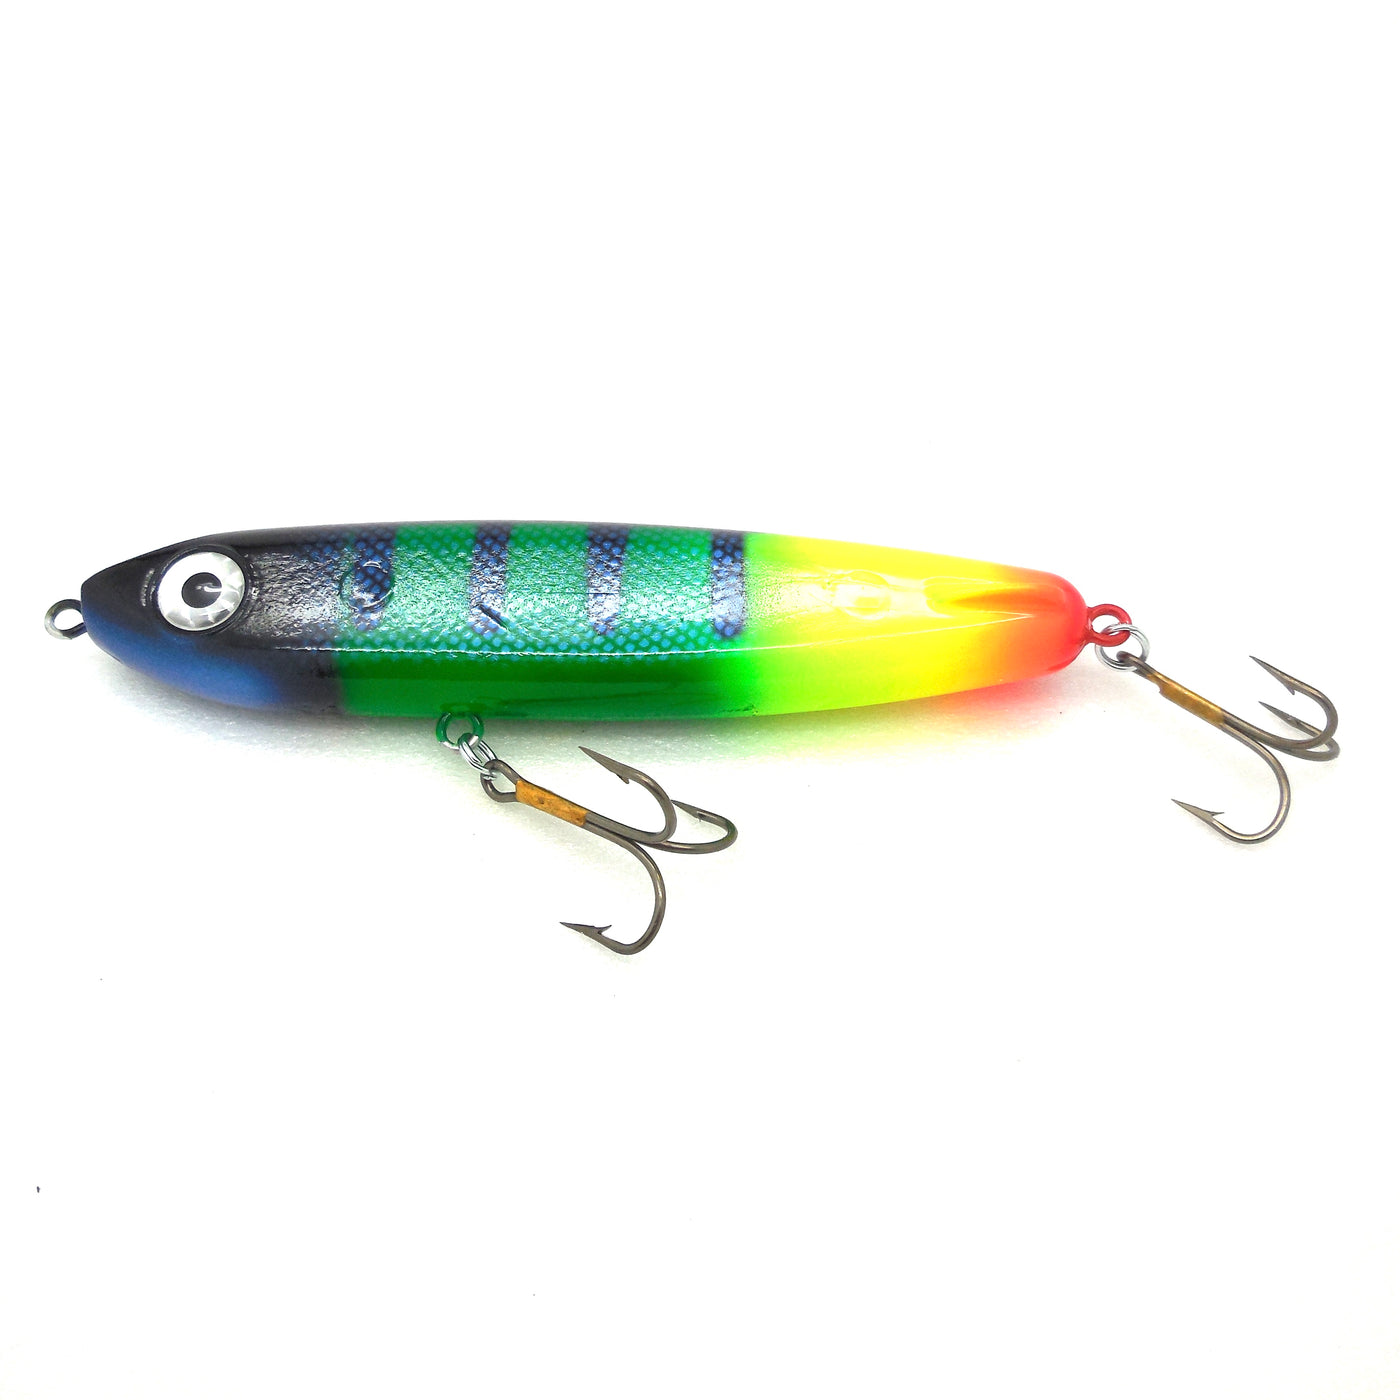 Esox Research Co.  Hell Hound 8 – Blue Ribbon Bait & Tackle